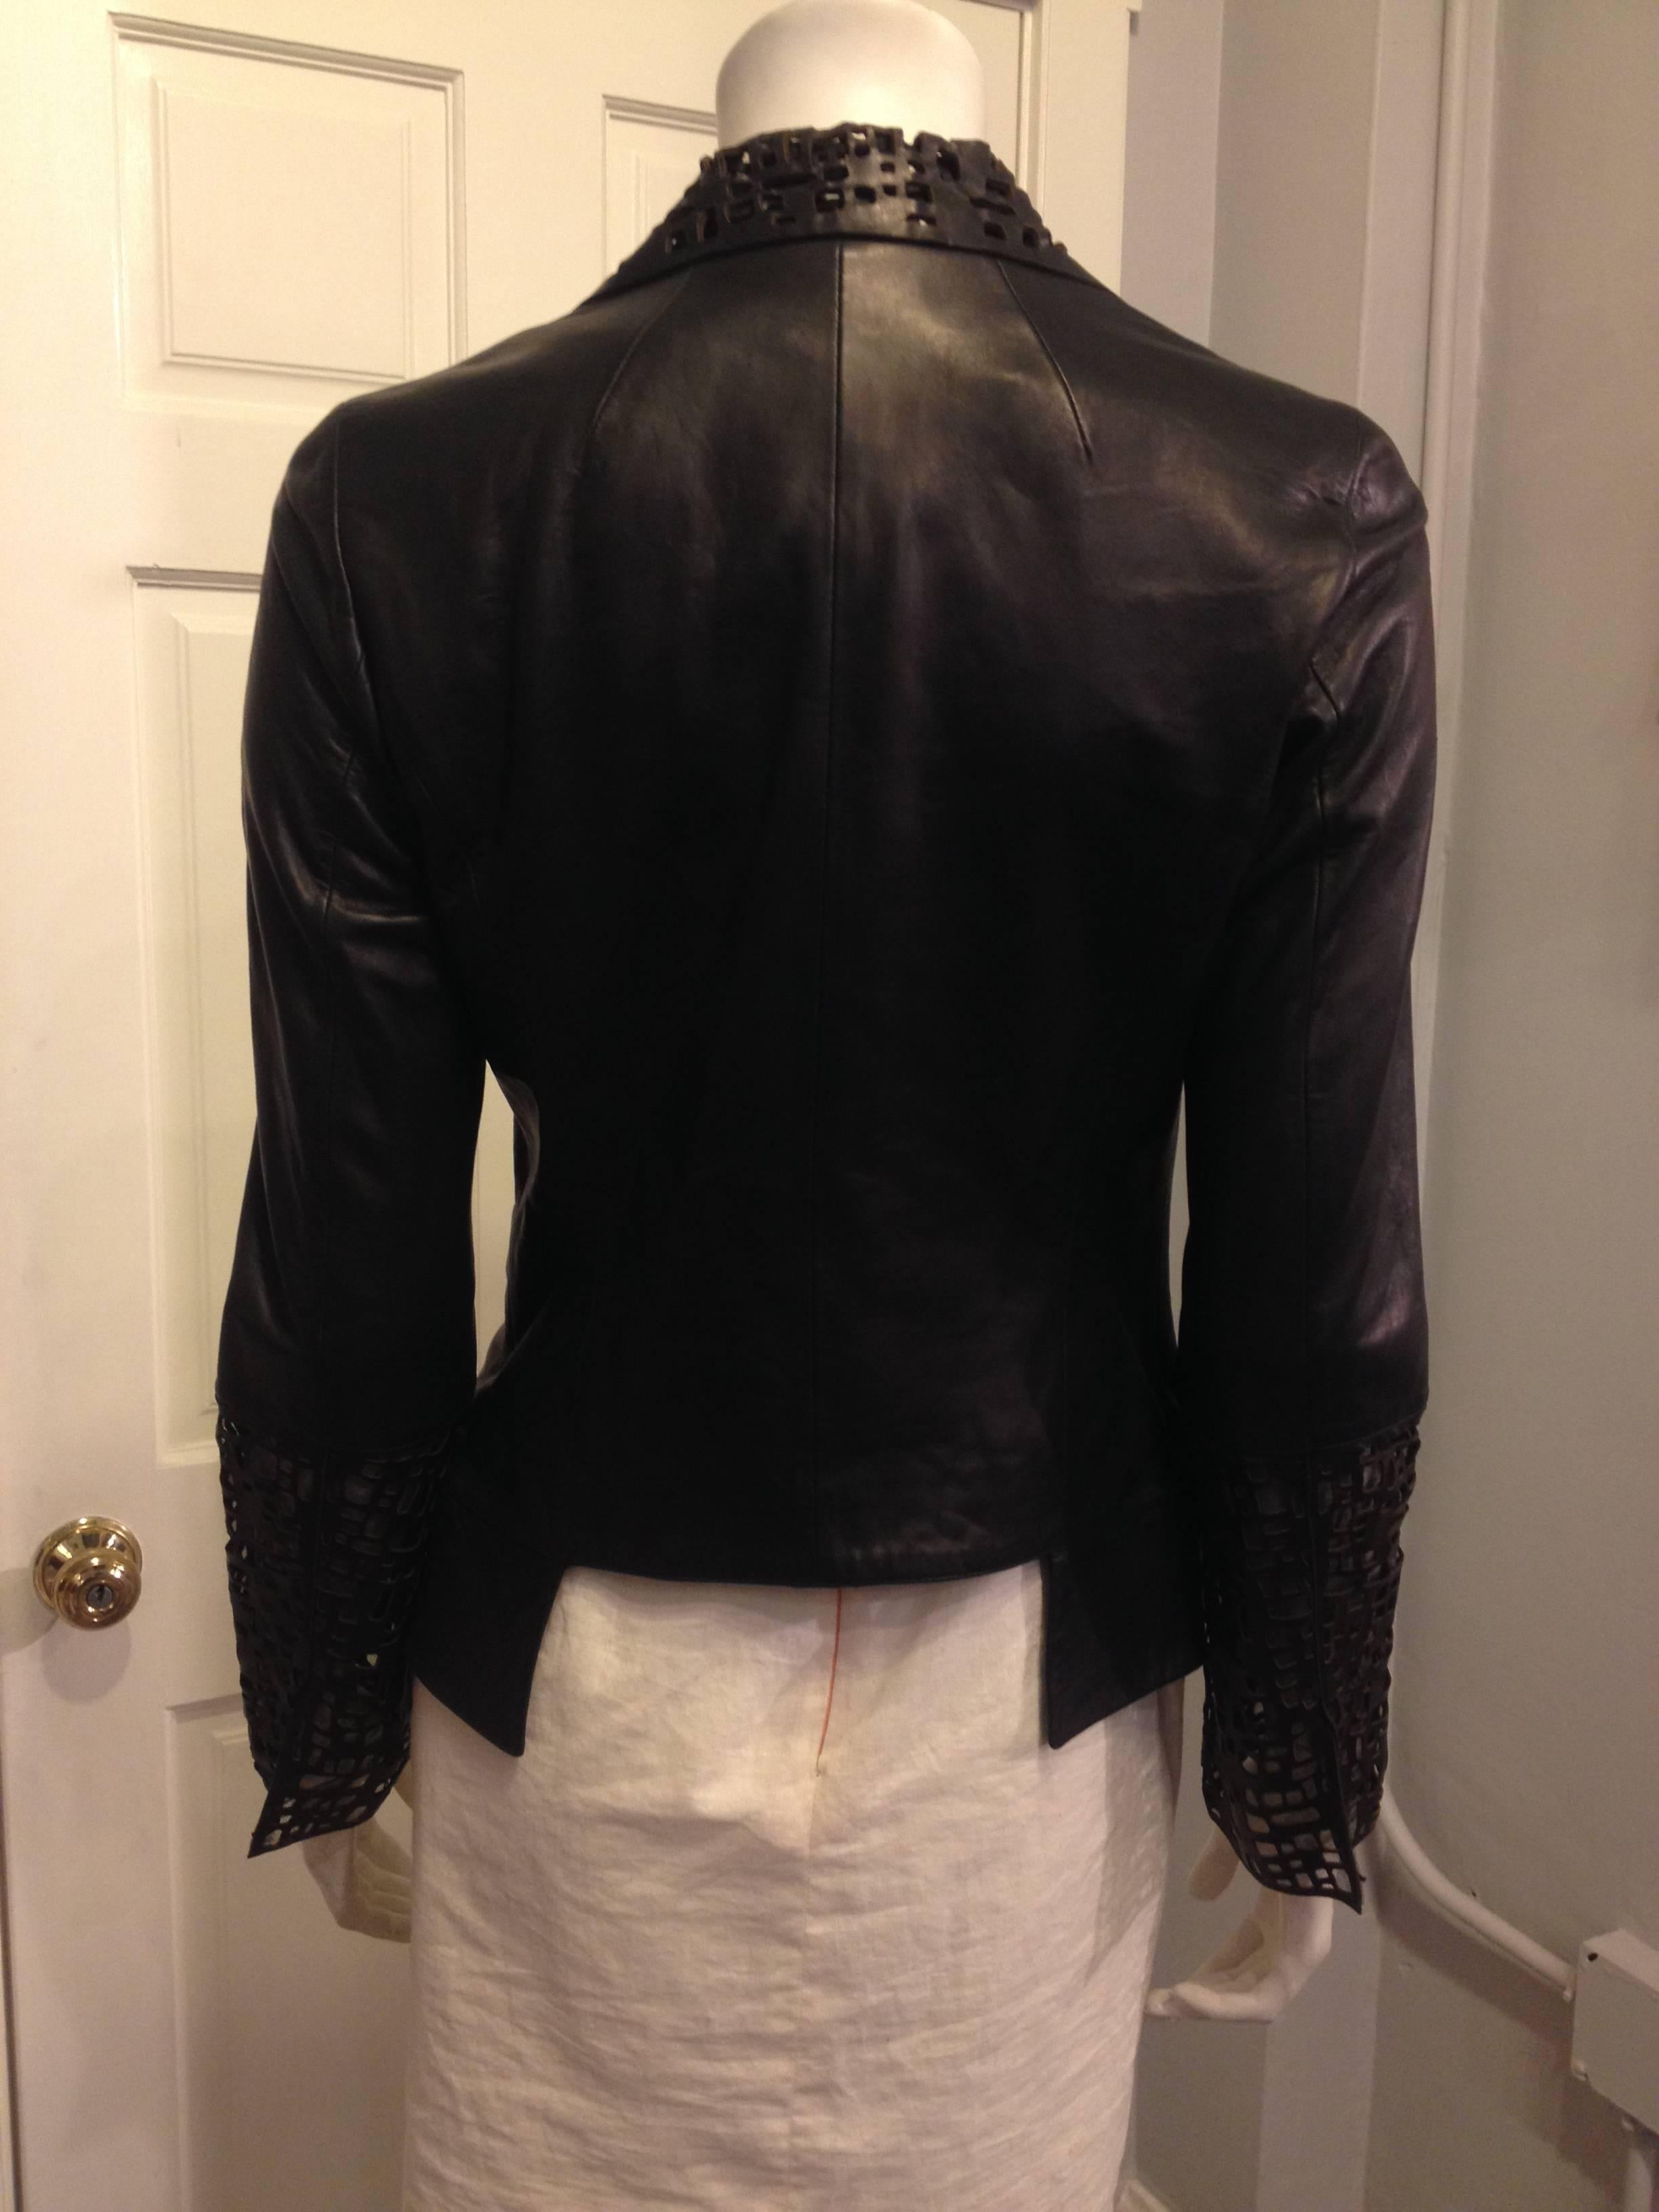 Chanel Black Leather Cutout Jacket In Excellent Condition For Sale In San Francisco, CA